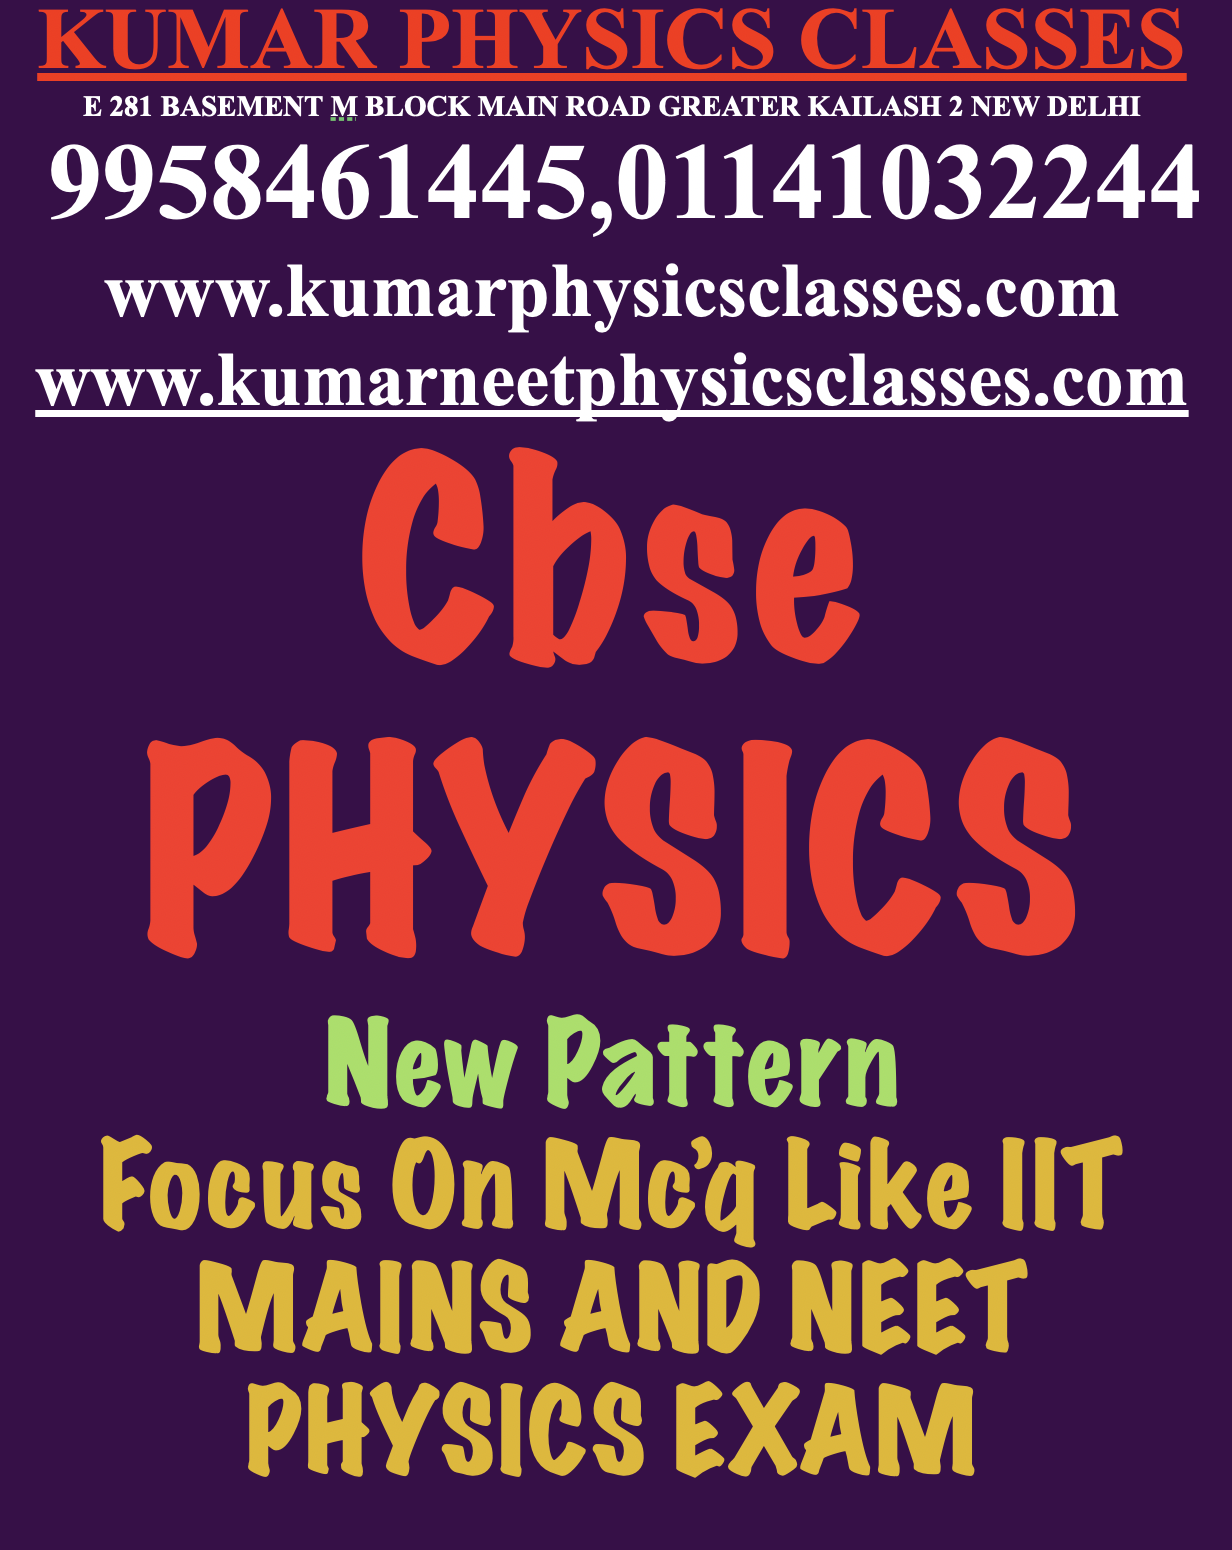 https://www.kumarneetphysicsclasses.com/single-post/2019/08/18/Try-To-Excel-In-Physics-To-Score-Good-Marks